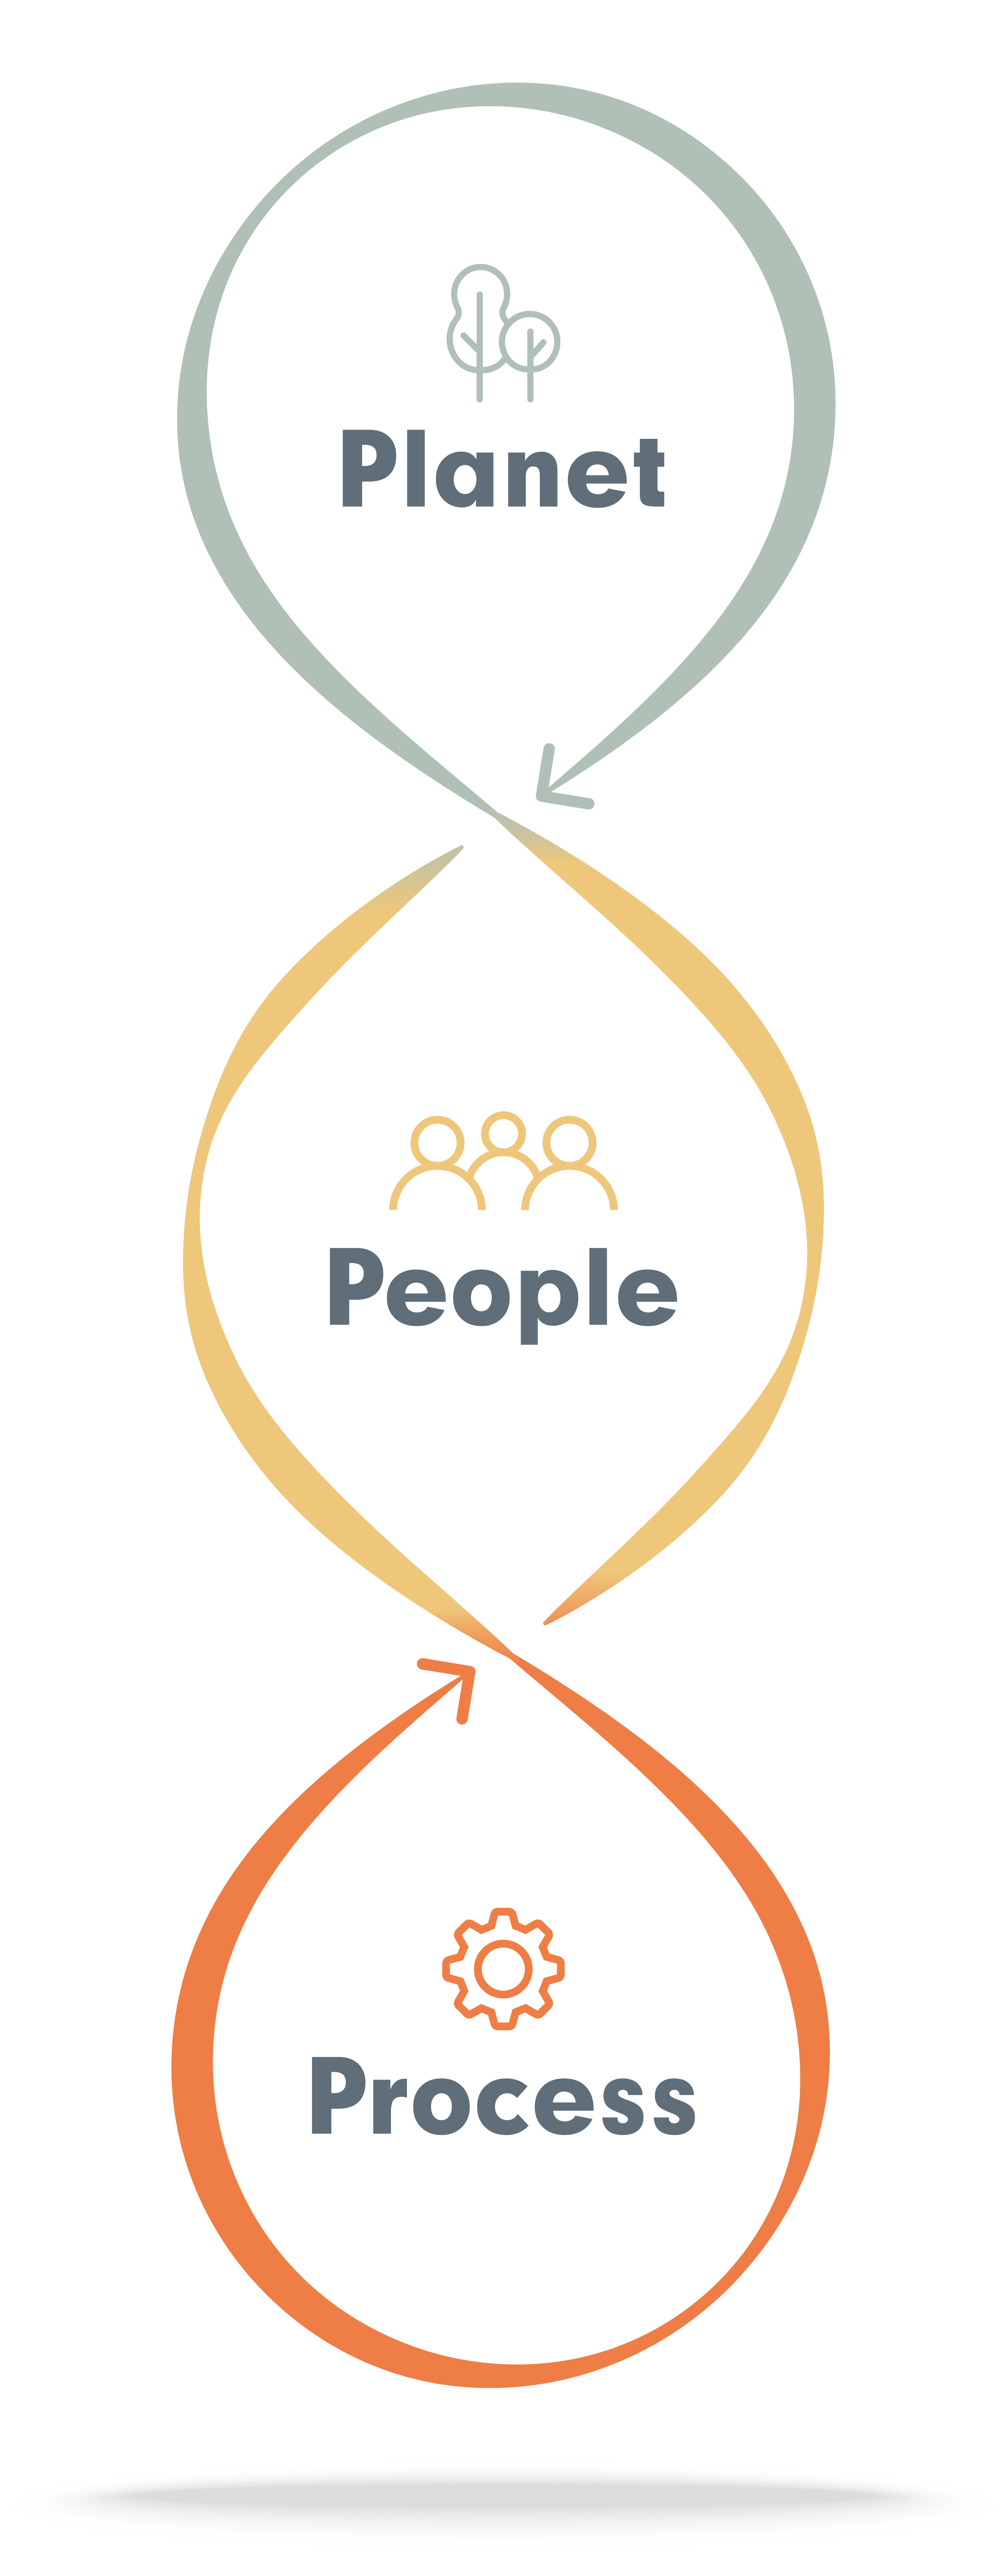 Marley sustainability campaign graphic using the 3 p's; planet, people process